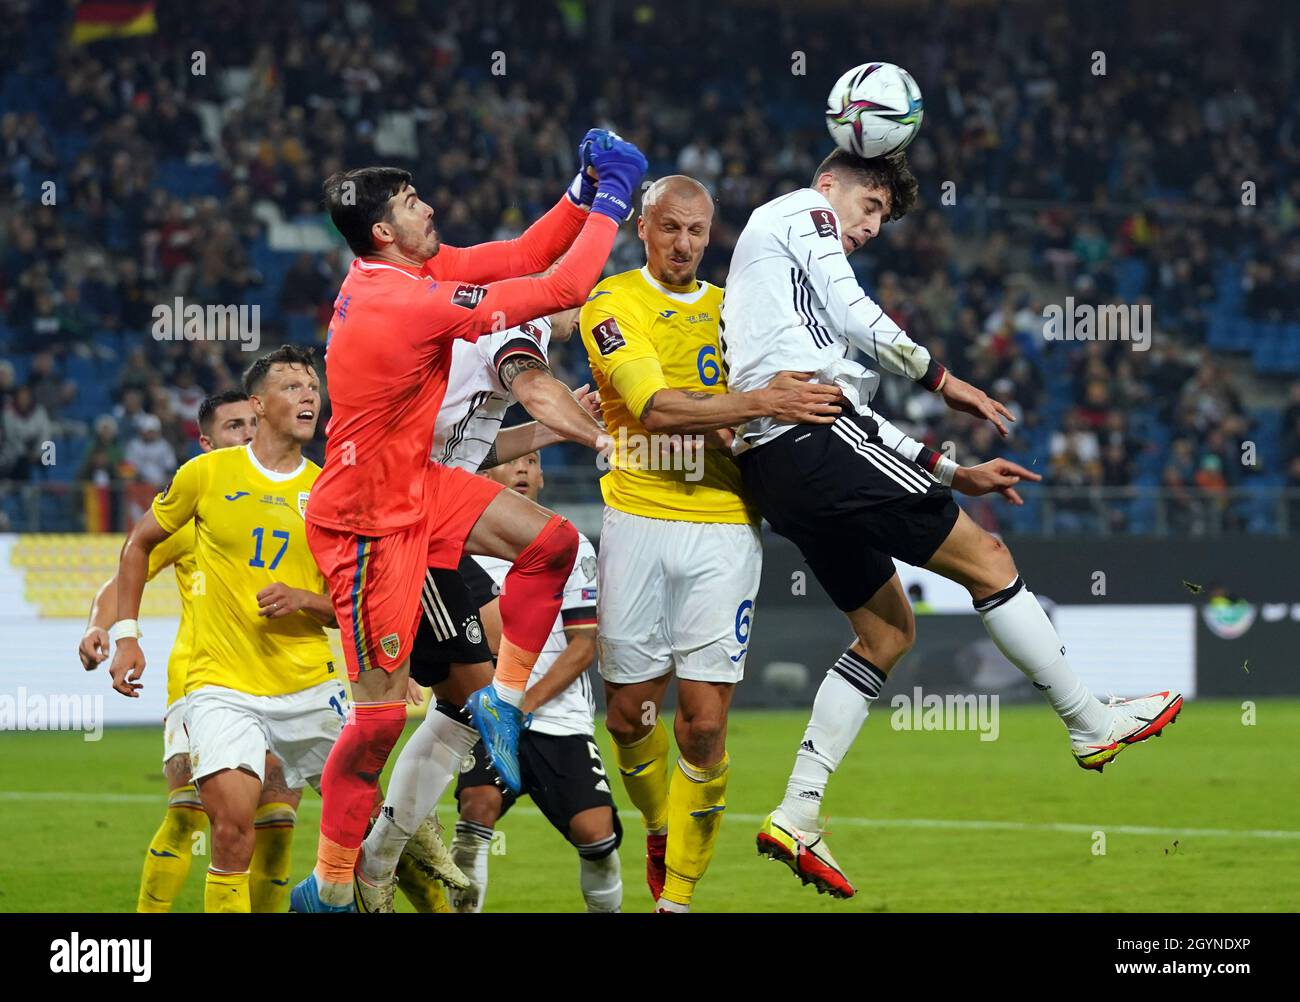 Hamburg, Germany. 08th Oct, 2021. Football: World Cup Qualification Europe, Germany - Romania, Group Stage, Group J, Matchday 7 at Volksparkstadion. Germany's Kai Havertz (r) goes for a header against Romania's goalkeeper Florin Nita (l) and Vlad Chiriches. Credit: Marcus Brandt/dpa/Alamy Live News Stock Photo